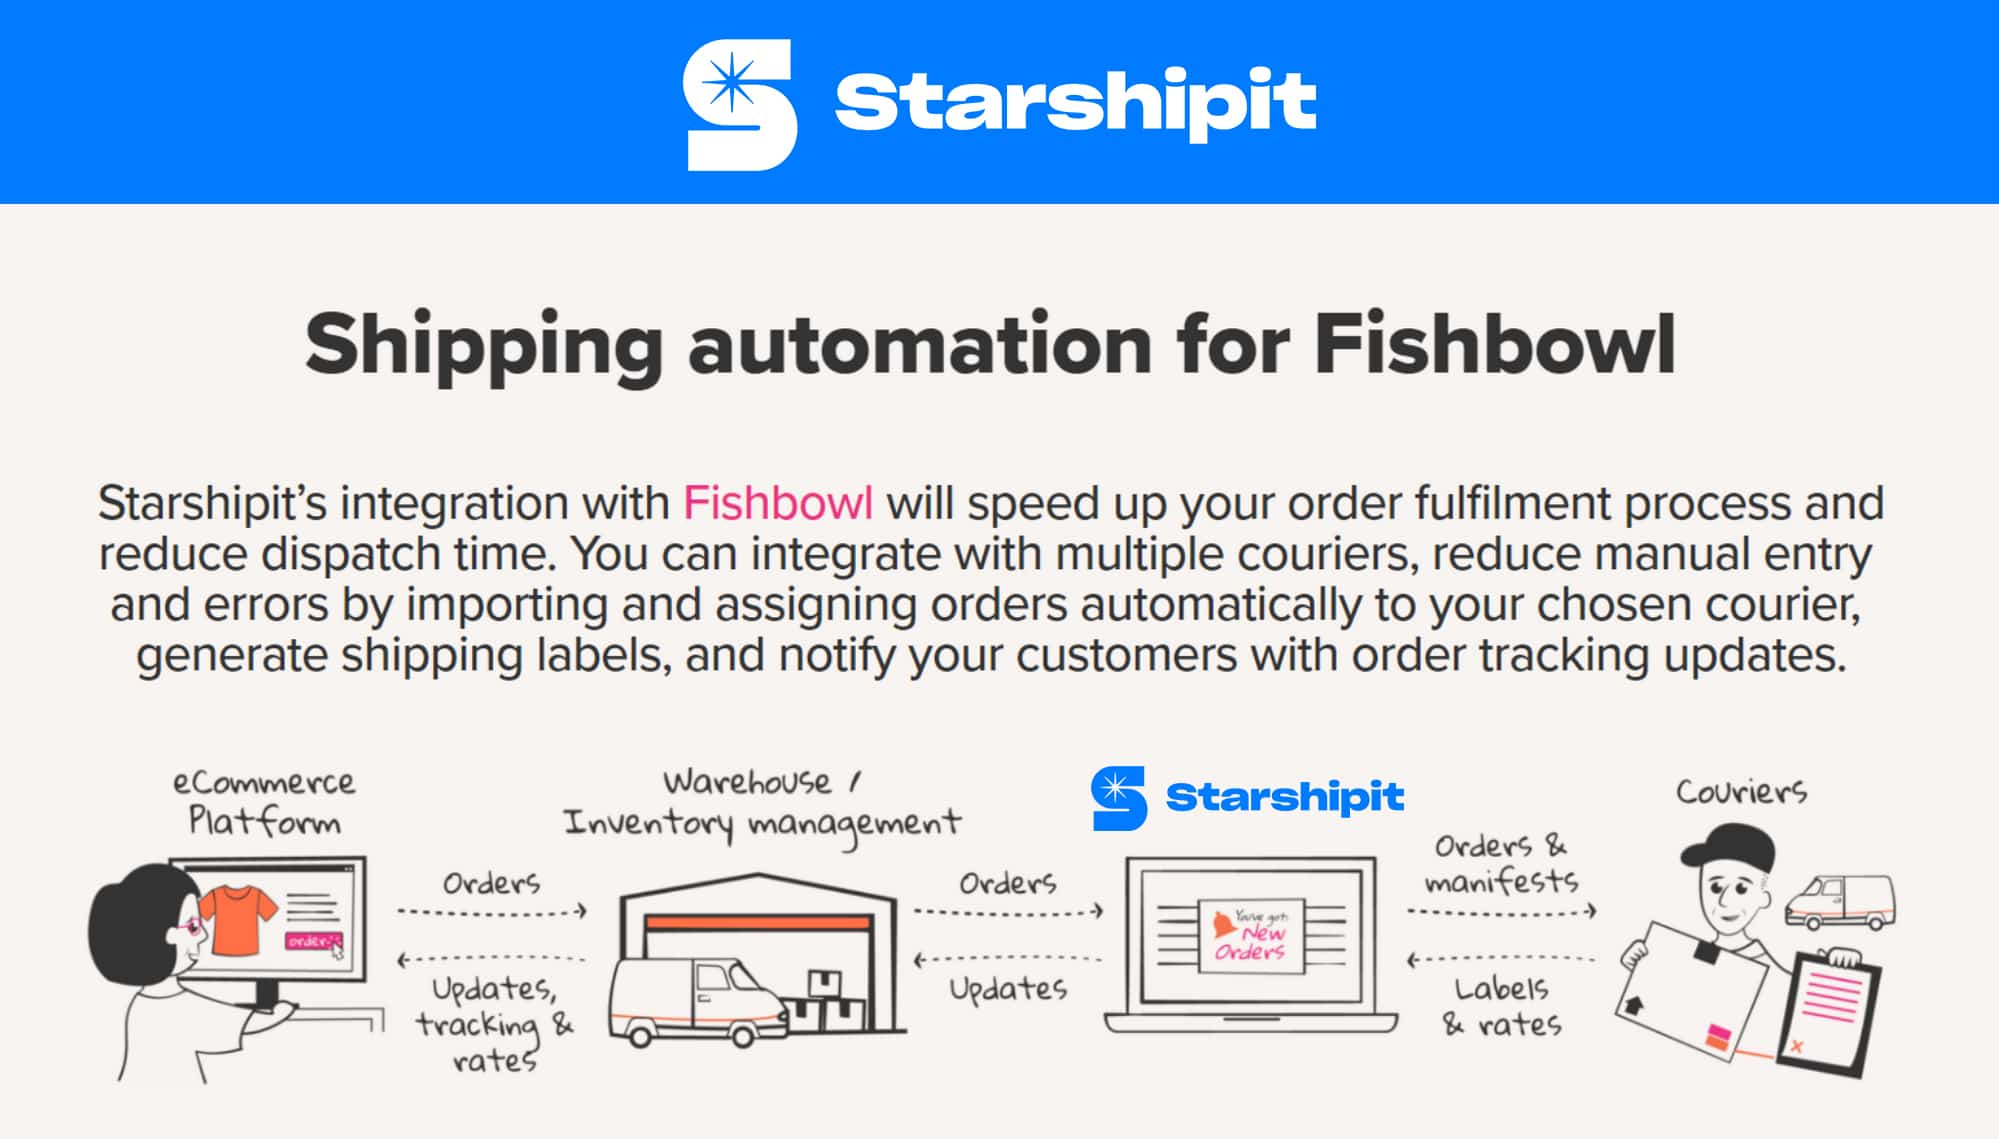 Starshipit and Fishbowl freight integration